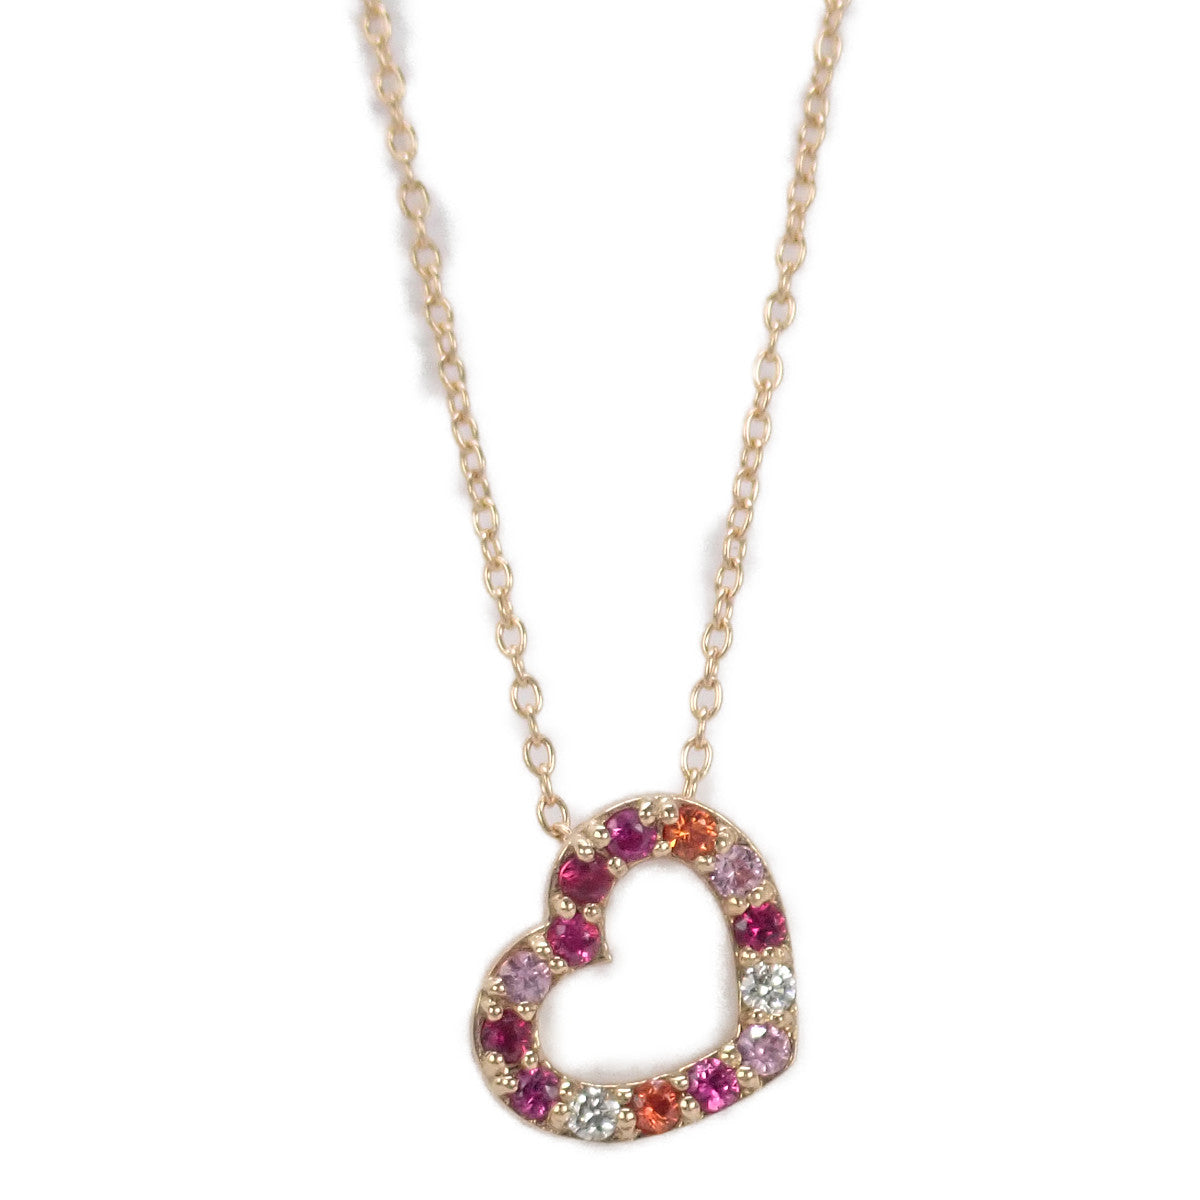 Ponte Vecchio Emozione Pompermo Heart Motif Necklace with Diamond 0.02ct, Ruby 0.03ct, Sapphire 0.09ct in K18 Pink Gold for Women (Used)